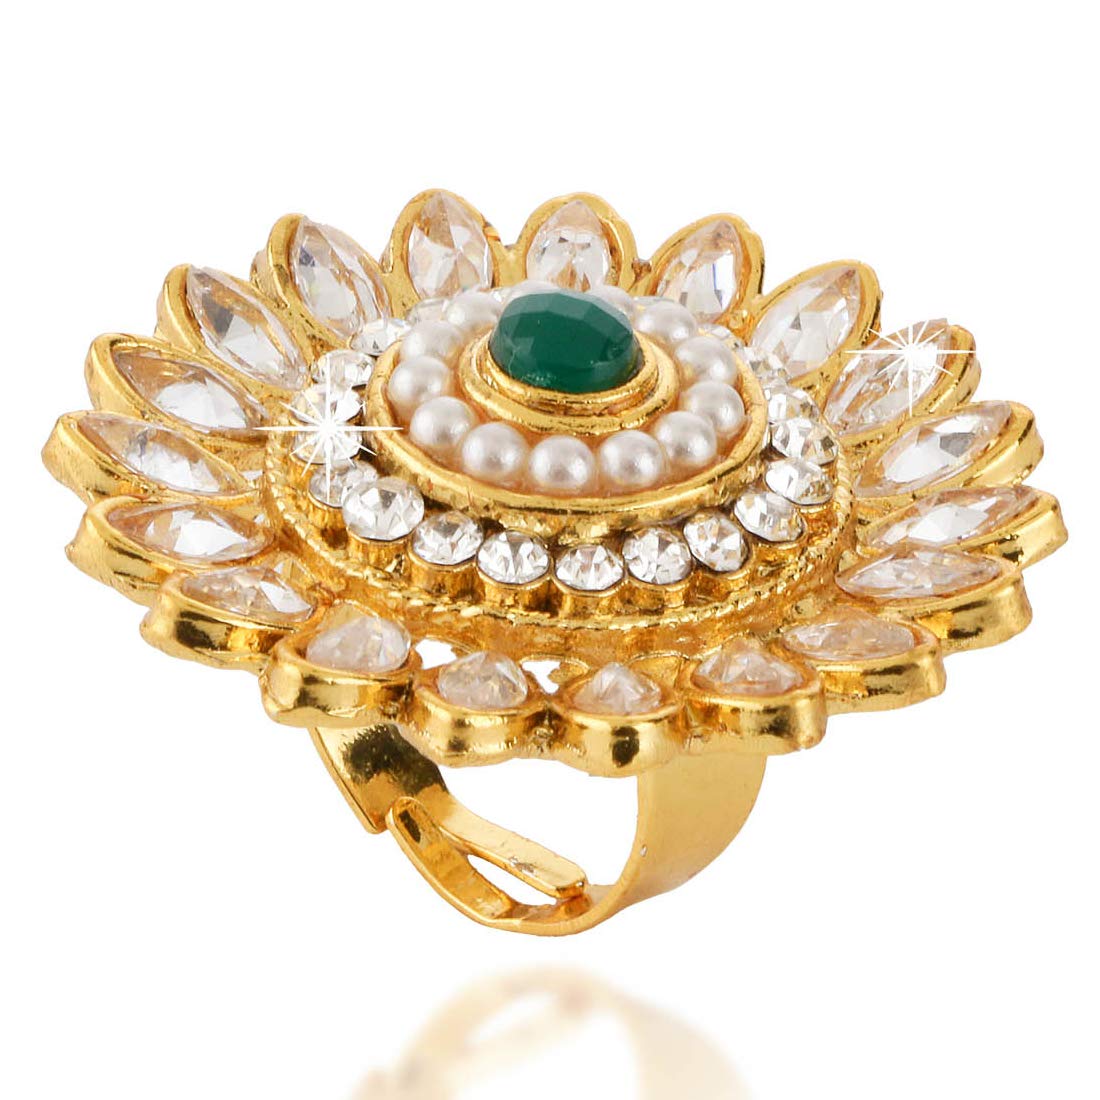 Designer rose gold cocktail ring with multicolour stones and fine cz -